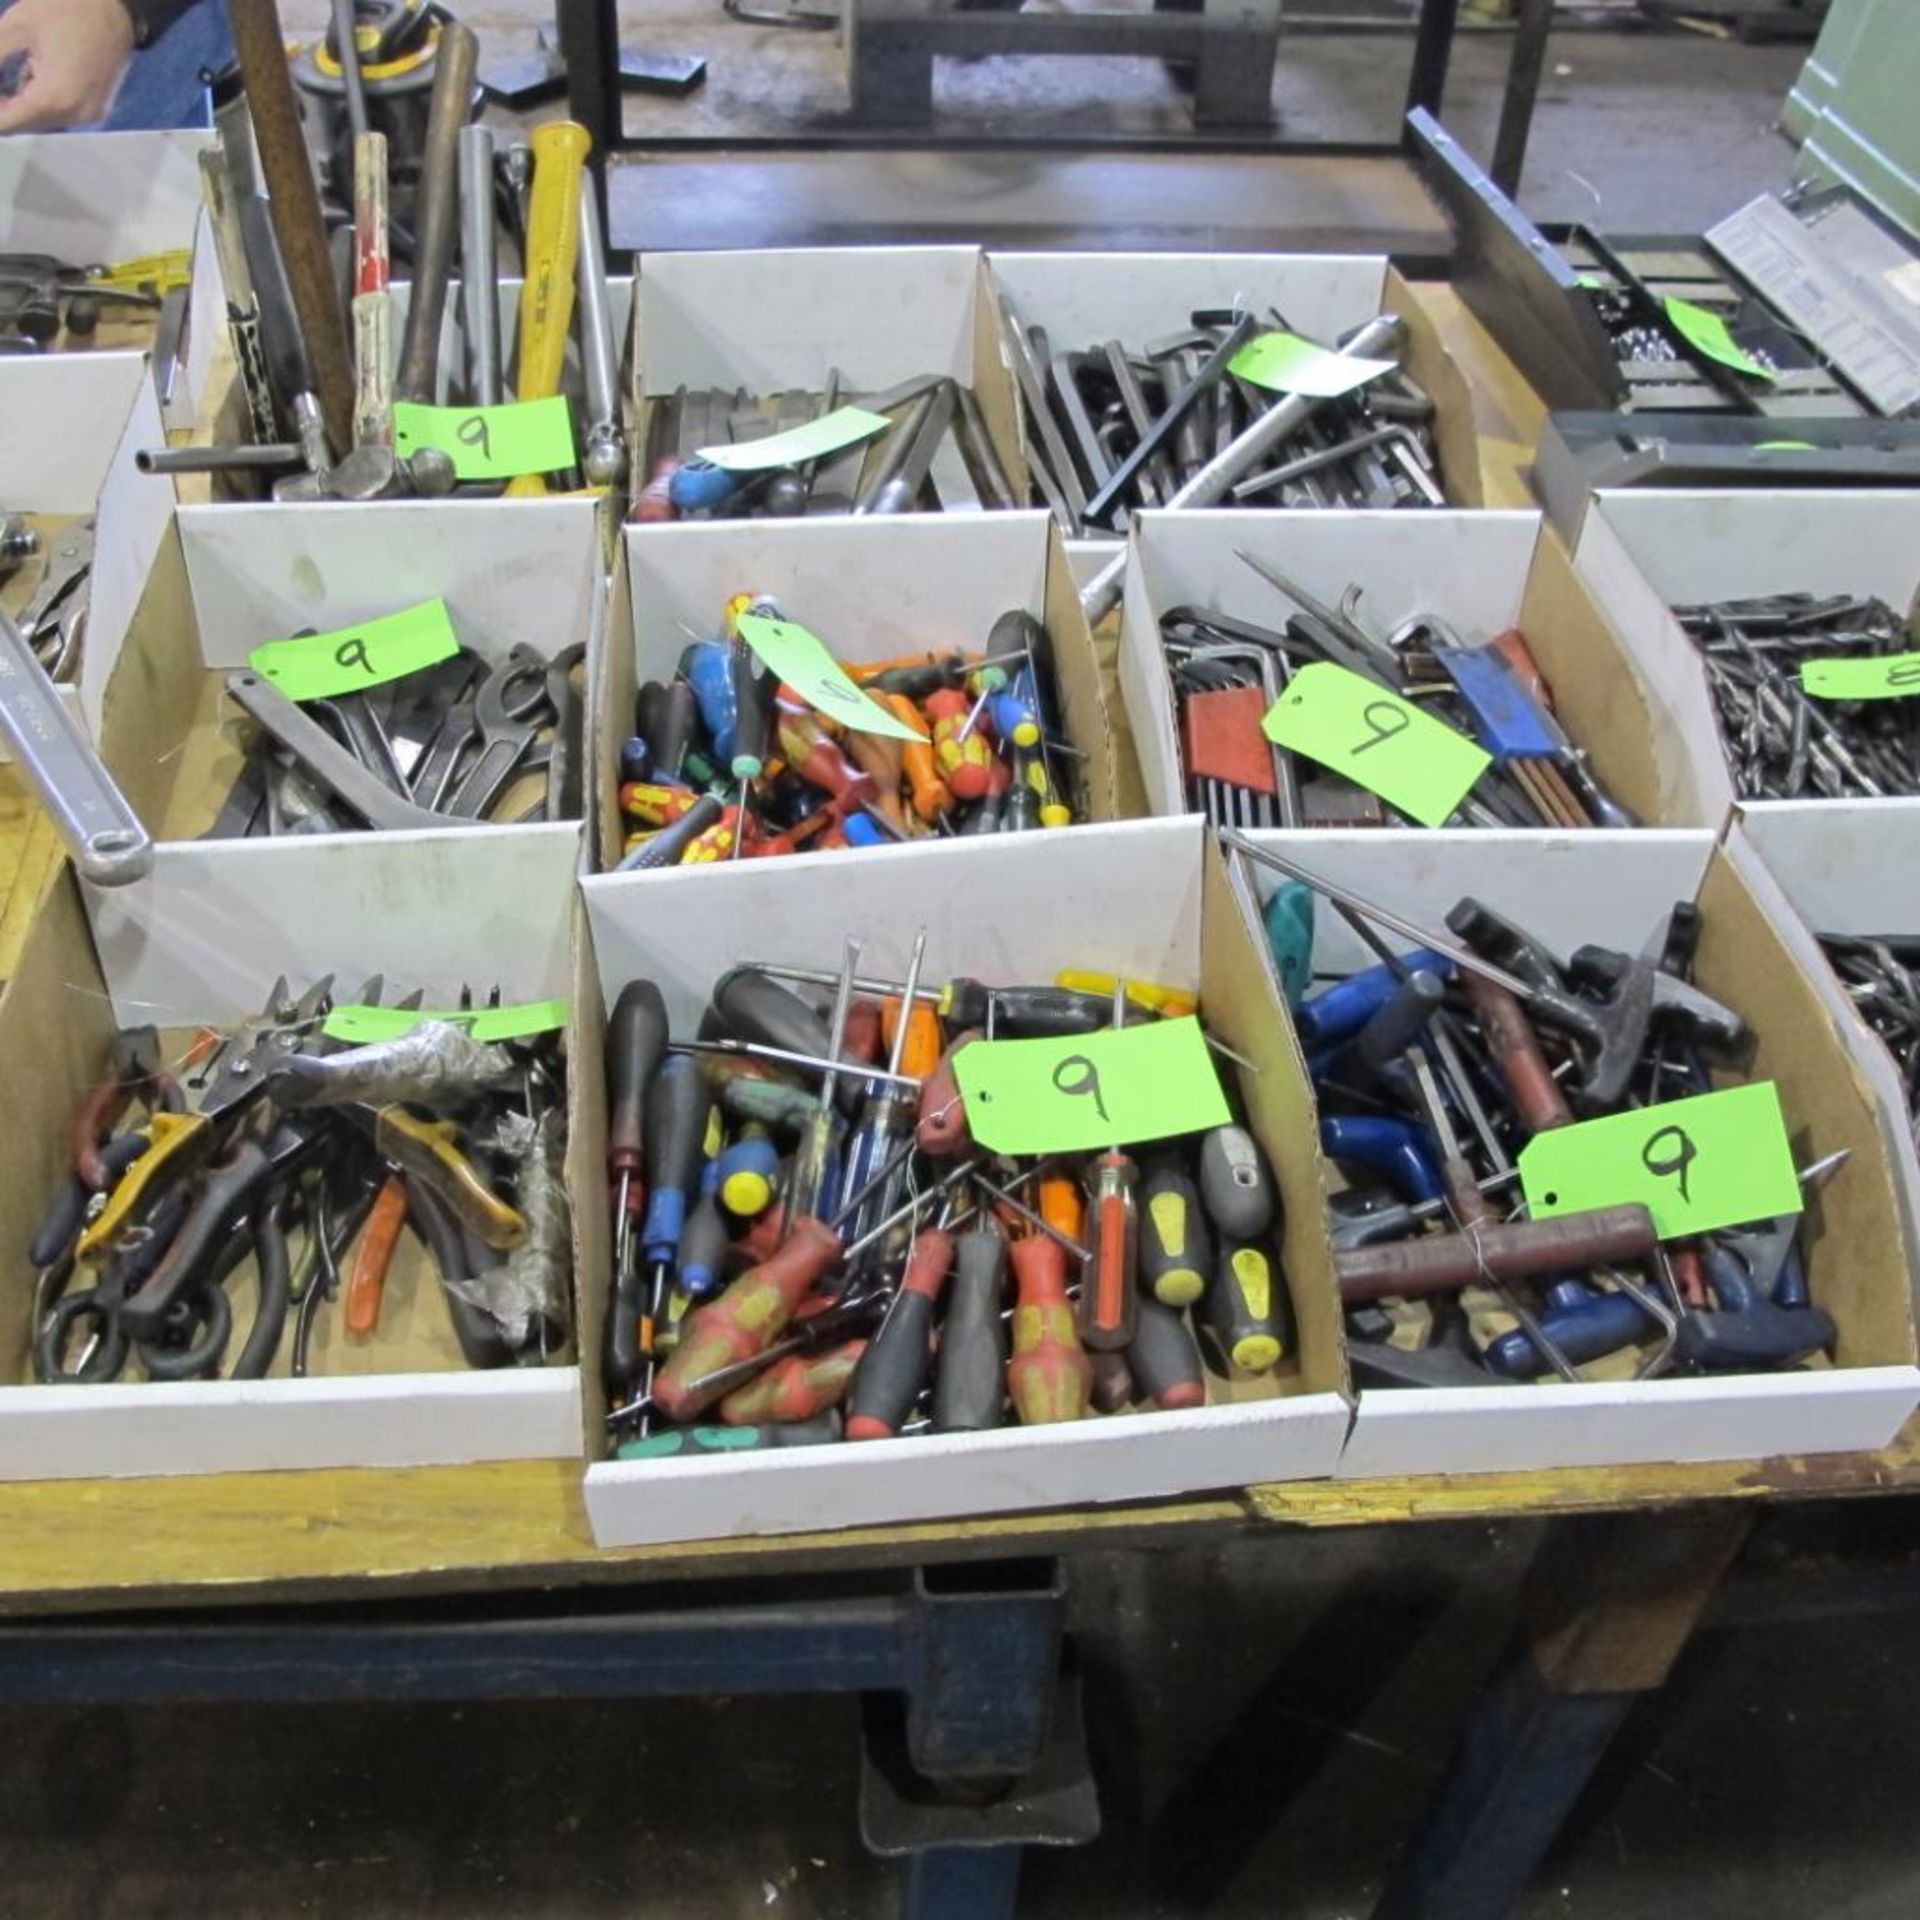 LOT OF 9 BOXES OF HAND TOOLS INCL ALLEN KEYS, FILES, HAMMERS/MALLETS, CUTTERS, CRESCENT WRENCHES DRI